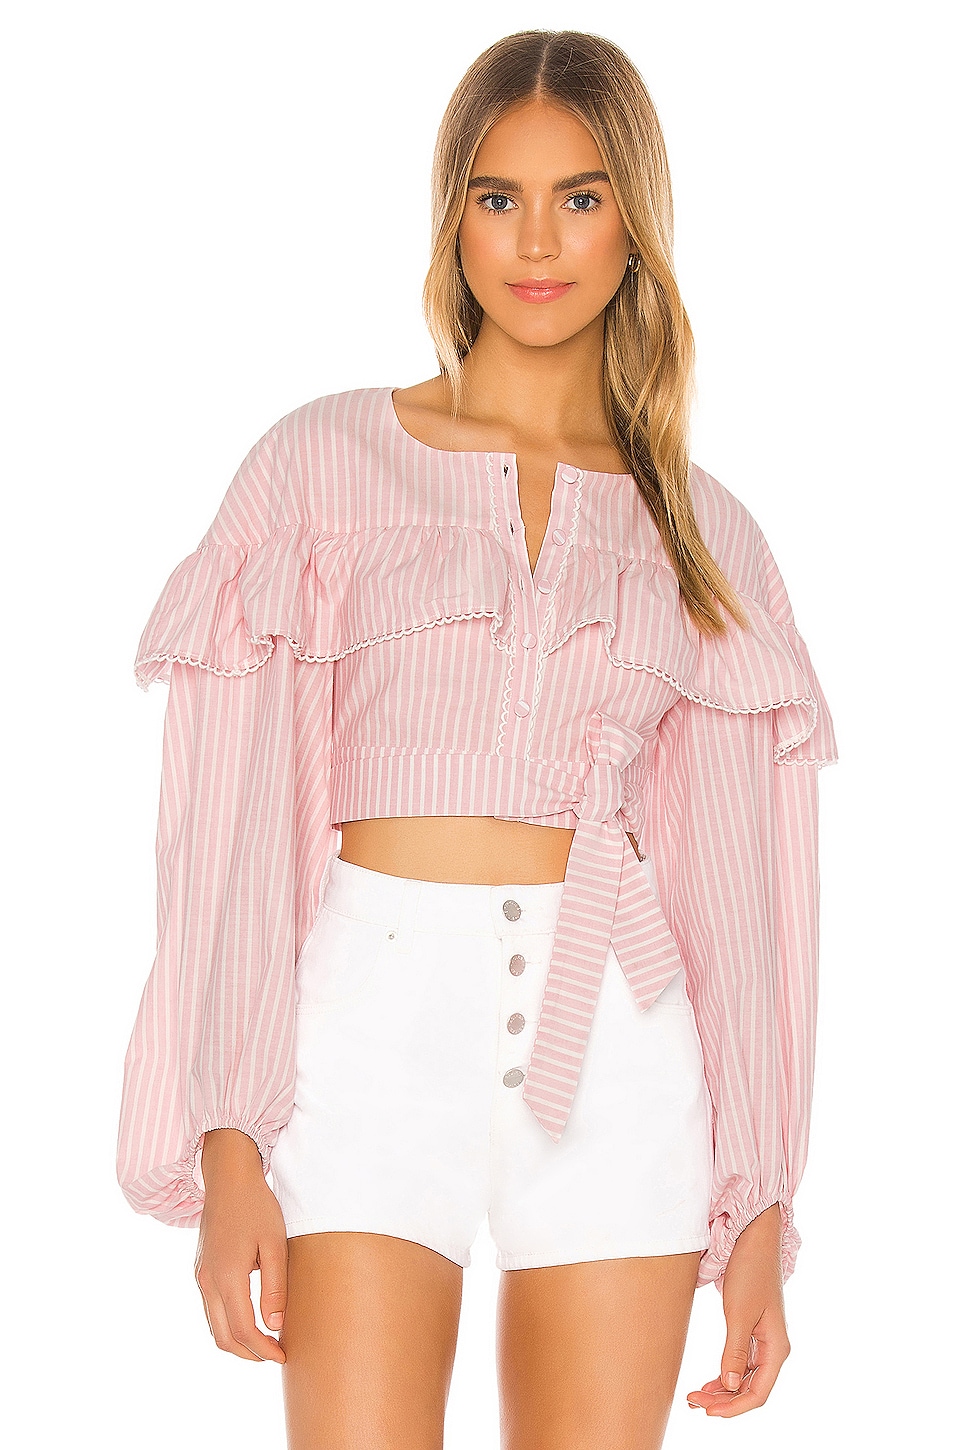 Lovers & Friends Halle Top In Pink & White